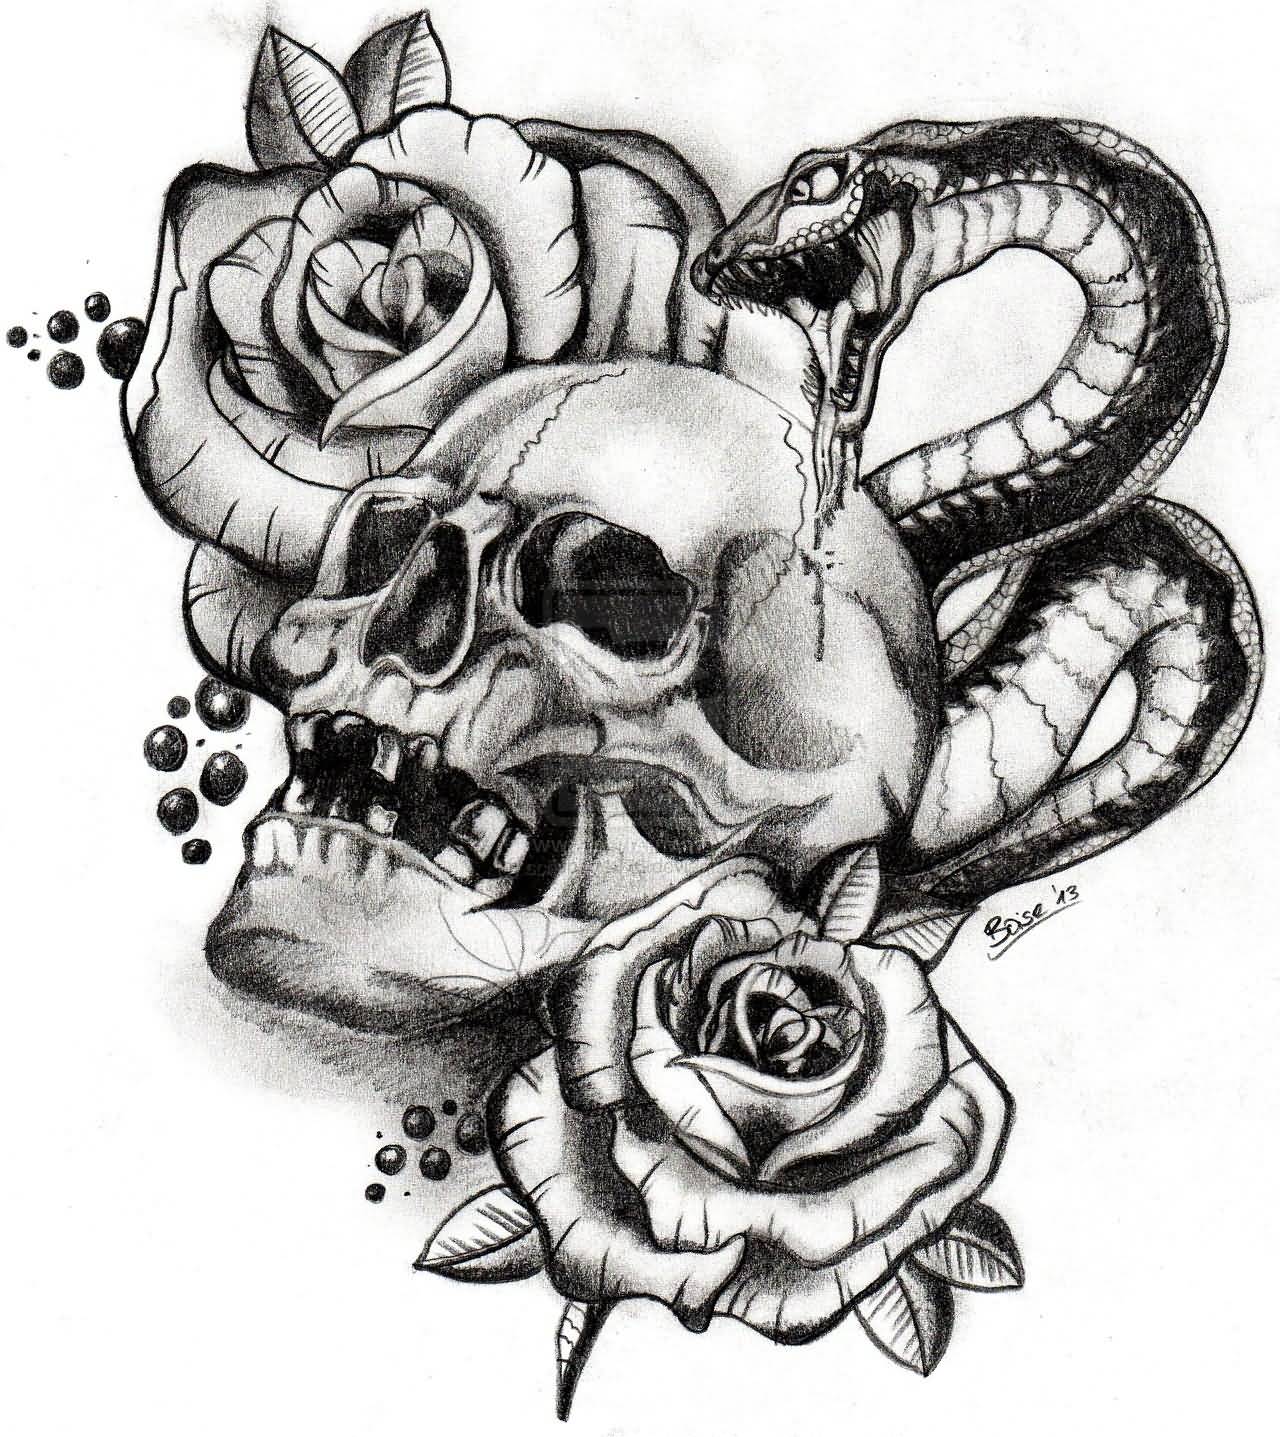 Black Ink Skull With Snake And Roses Tattoo Design